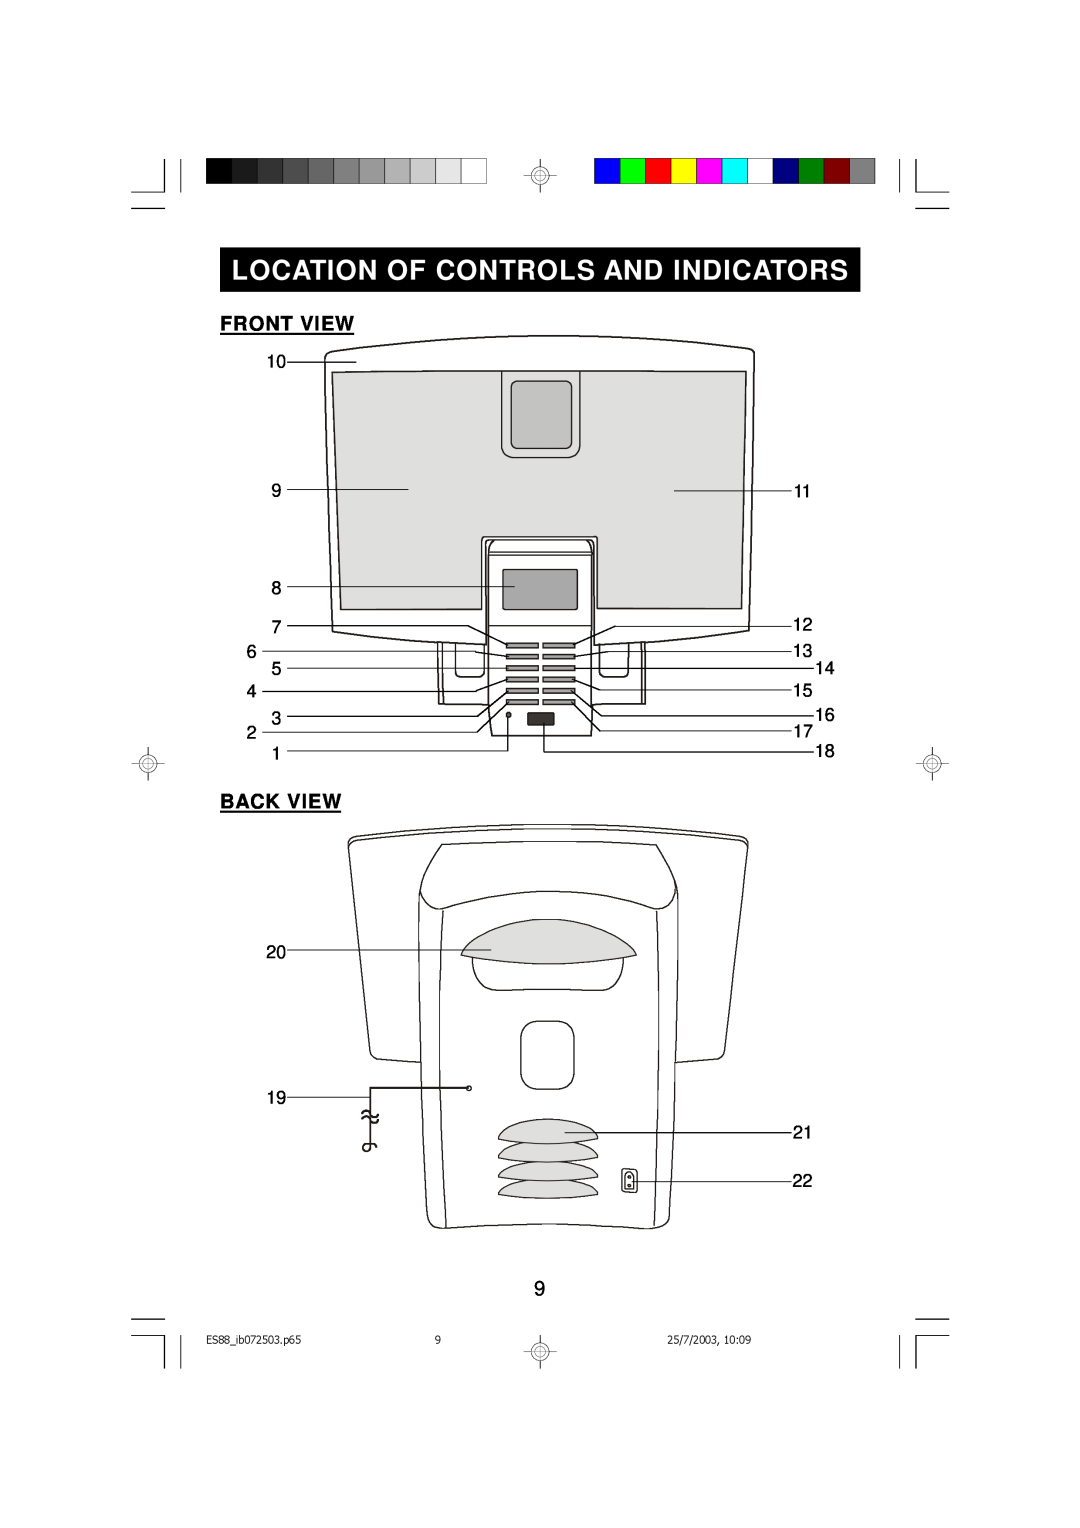 Emerson ES88 owner manual Front View, Back View, Location Of Controls And Indicators 